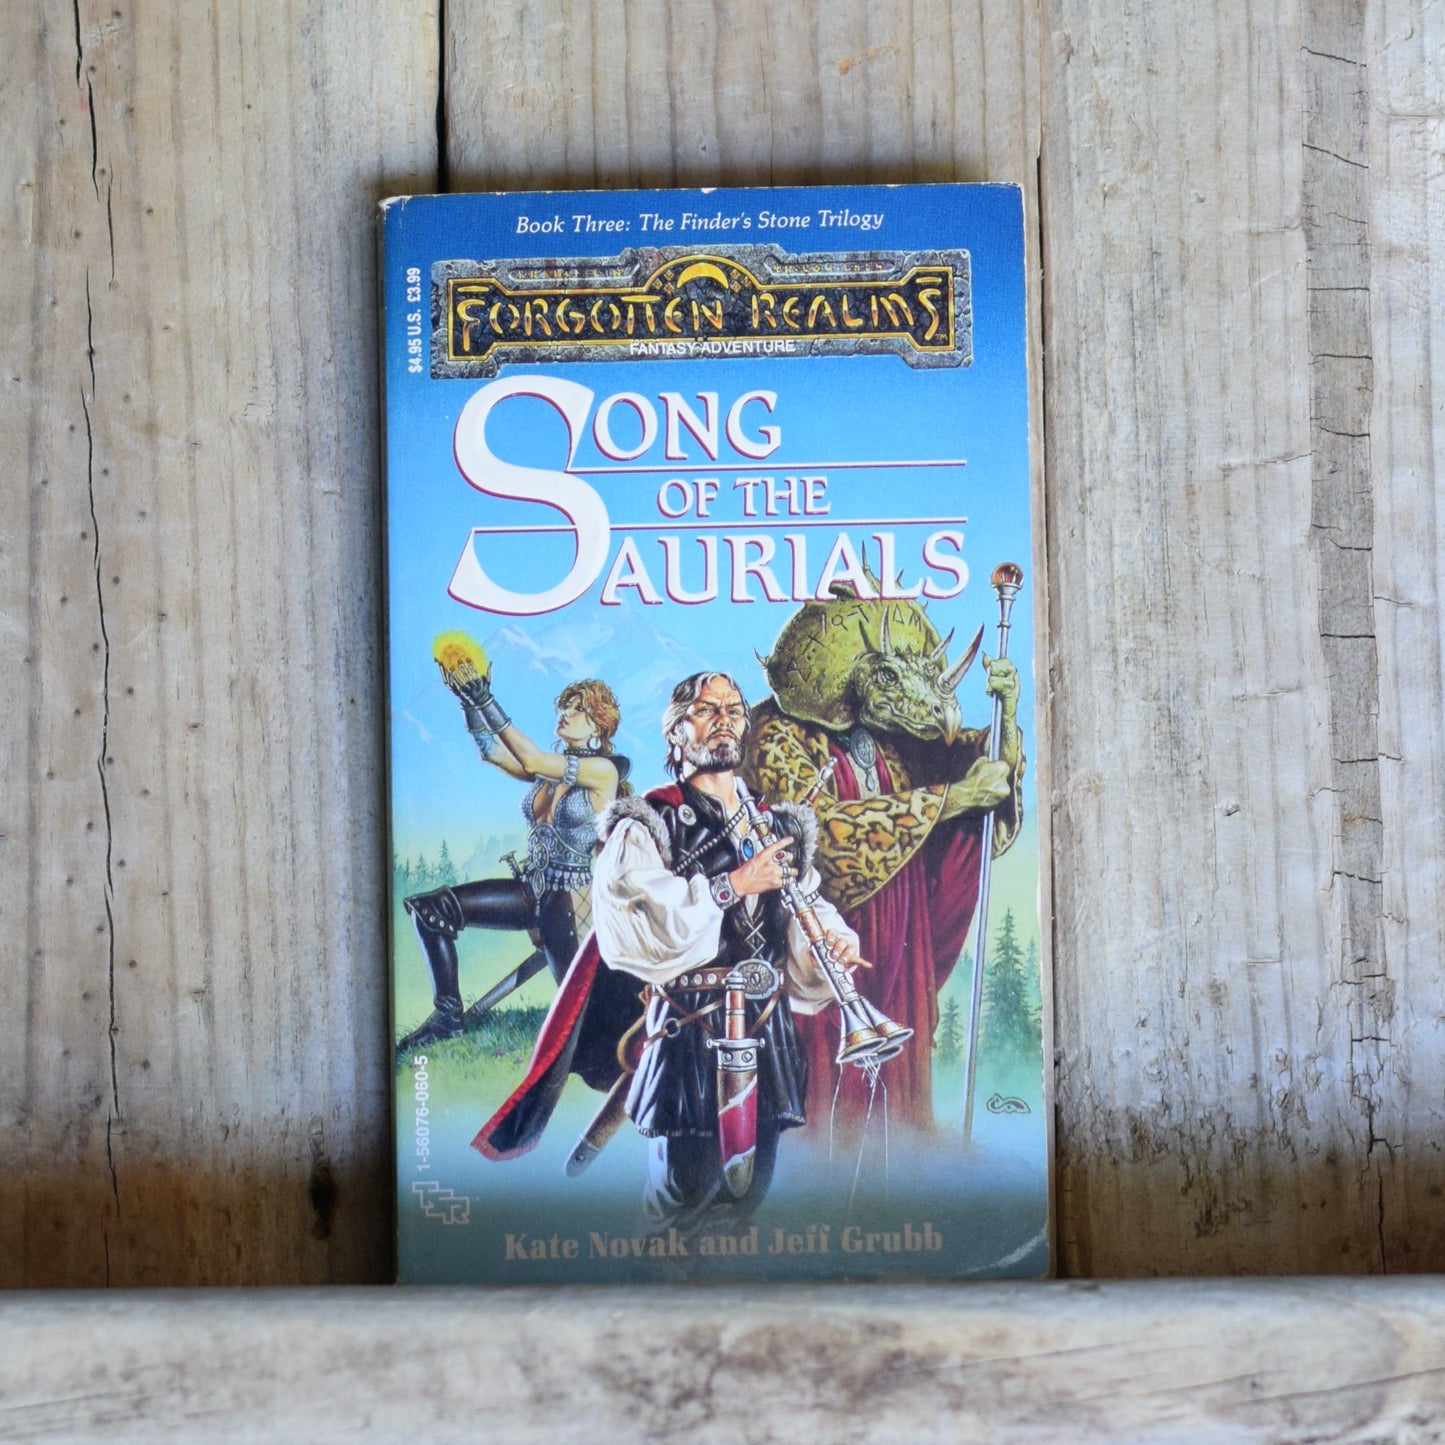 Vintage Dungeons and Dragons Paperback: Kate Novak and Jeff Grubb - Song of the Saurials FIRST PRINTING